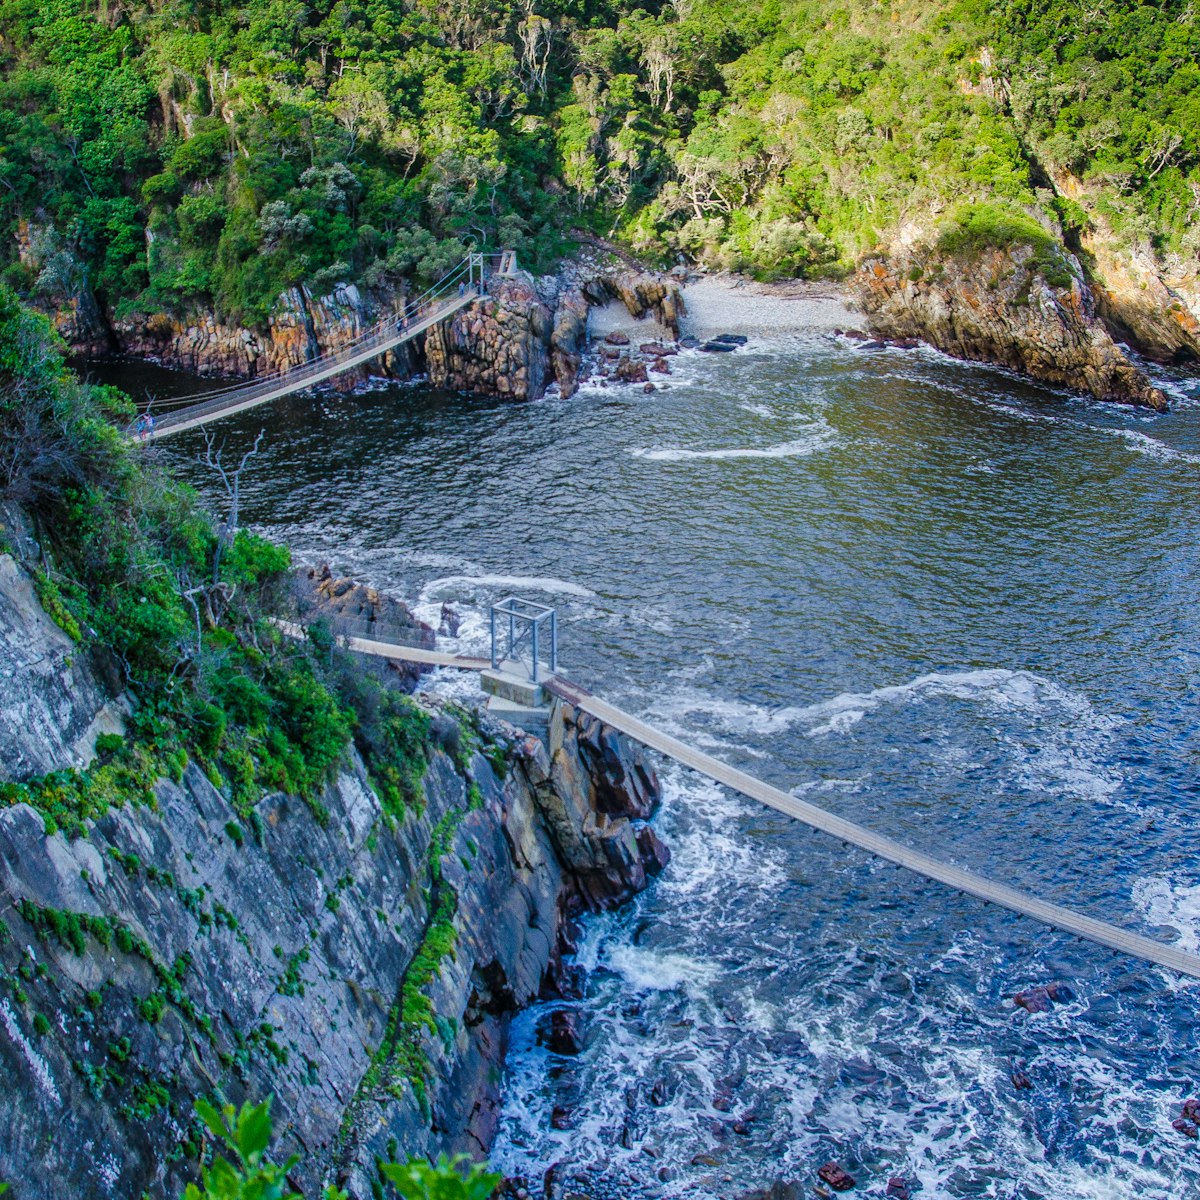 Hanging bridges above the sea in the Tsitsikamma section of the Garden Route National Park, South Africa.